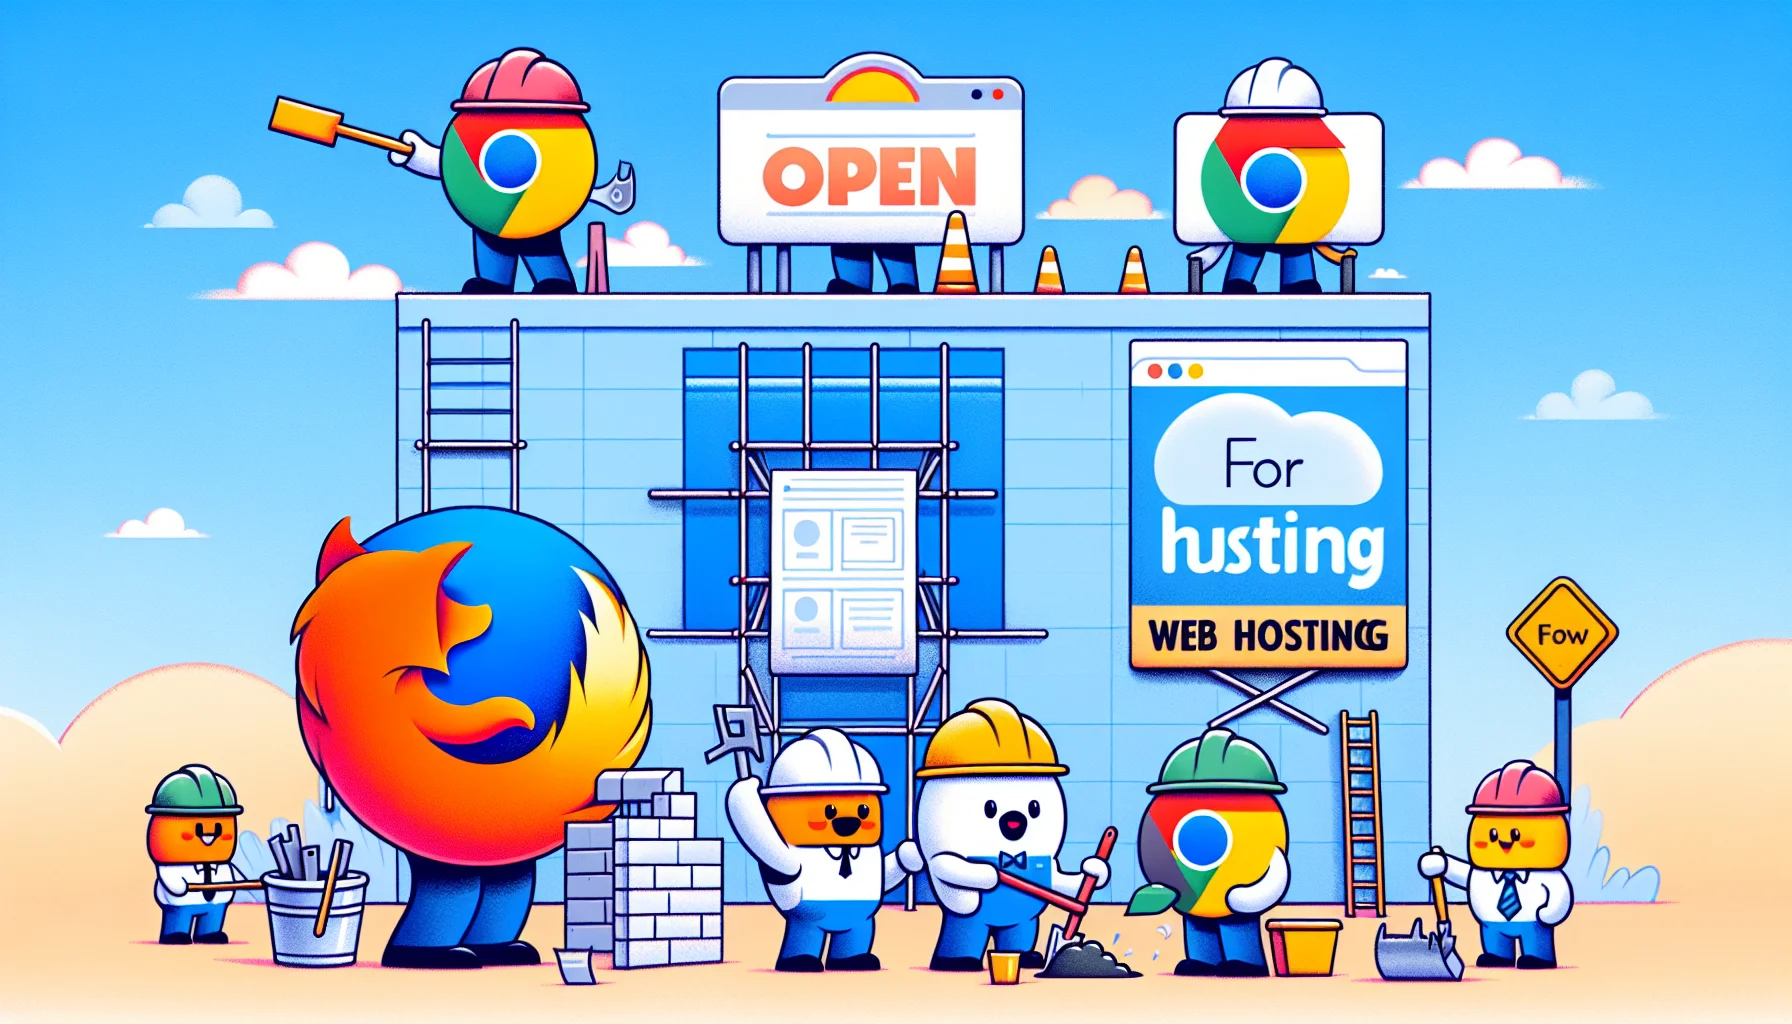 Create a whimsical illustration where anthropomorphic browser icons are constructing a website, like builders at a construction site, symbolizing the Webflow website builder. Each browser icon could have its own unique construction role. For instance, the Firefox icon might be overseeing the blueprints, Chrome may be pouring cement, while Safari could be putting up scaffolding. In the background, a large, playful billboard advertising web hosting services. The billboard could show a cloud with an 'Open for Business' sign, indicating the ease and readiness of web hosting.